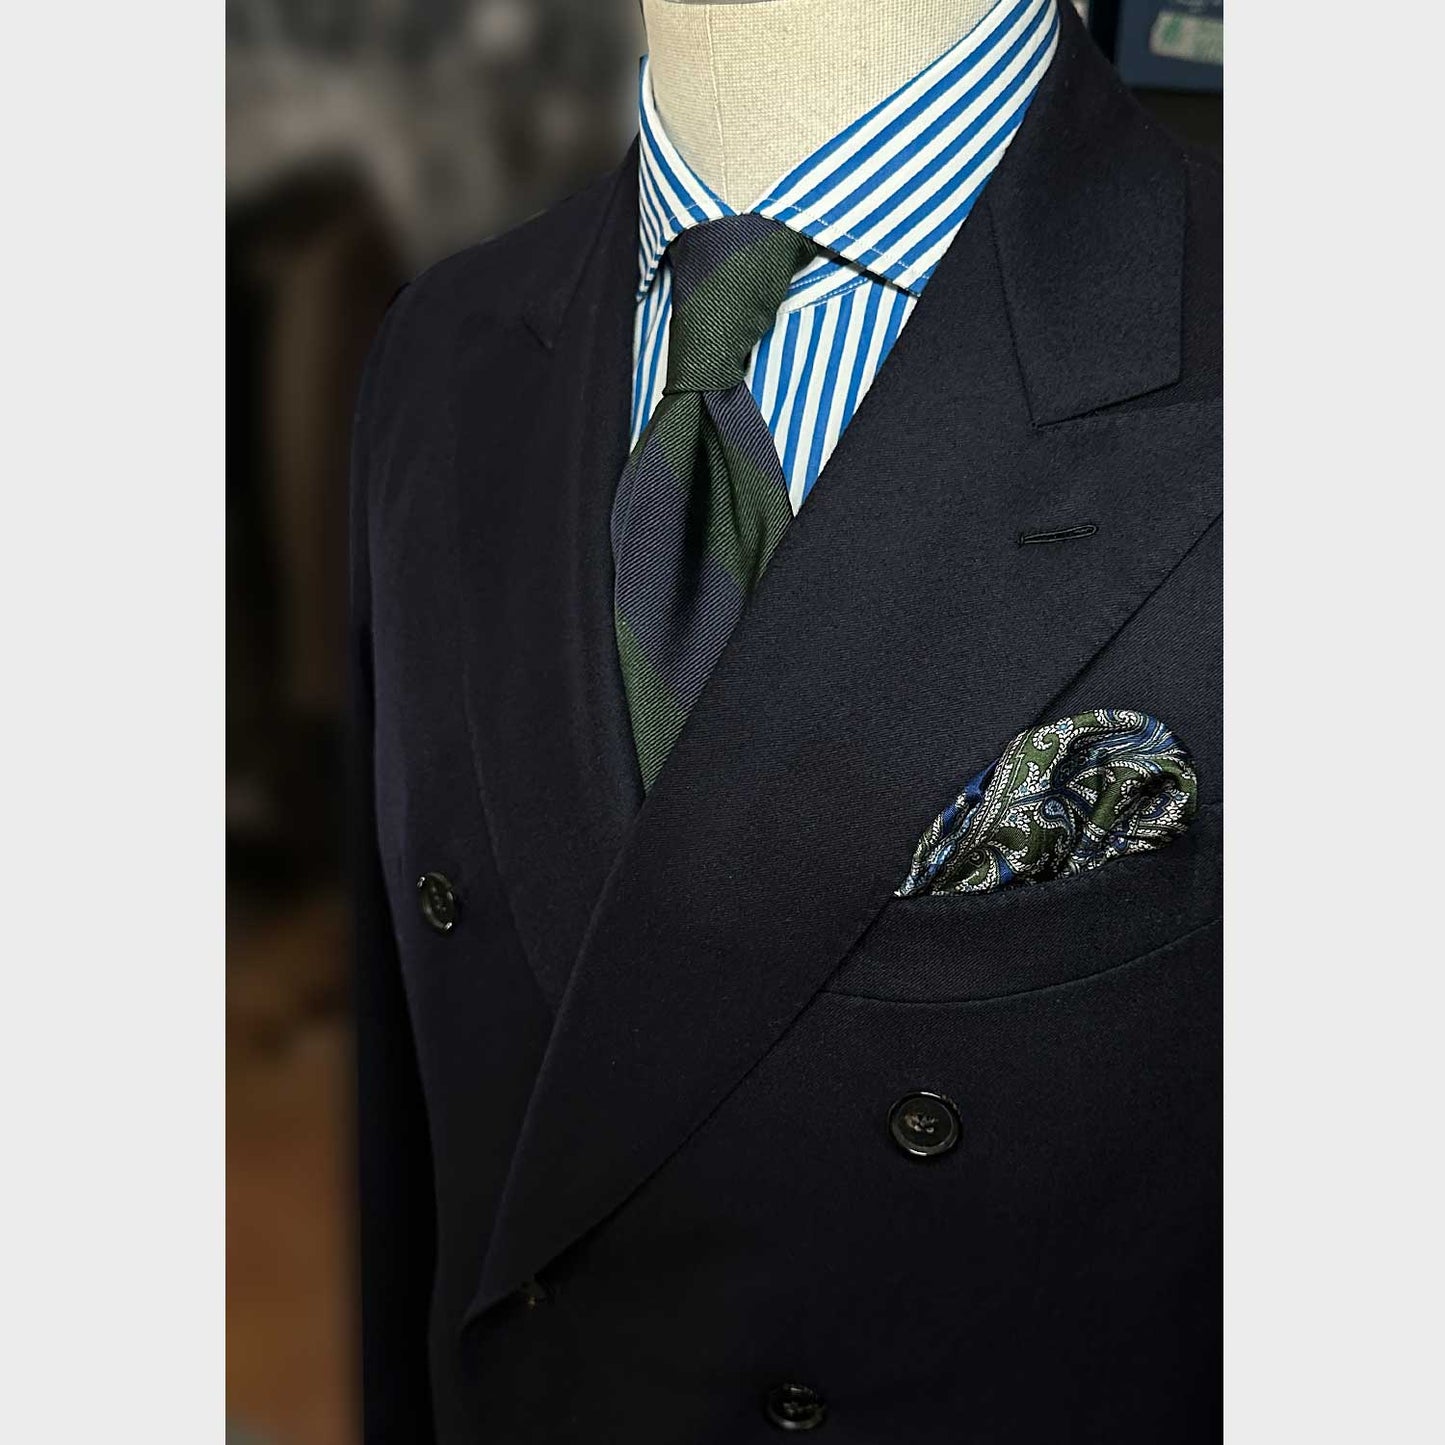 Pine Green Wide Striped Regimental Jacquard Silk Tie. Classic jacquard silk tie with wide striped pine green and navy blue, handmade in Italy by F.Marino Napoli exclusive for Wools Boutique Uomo